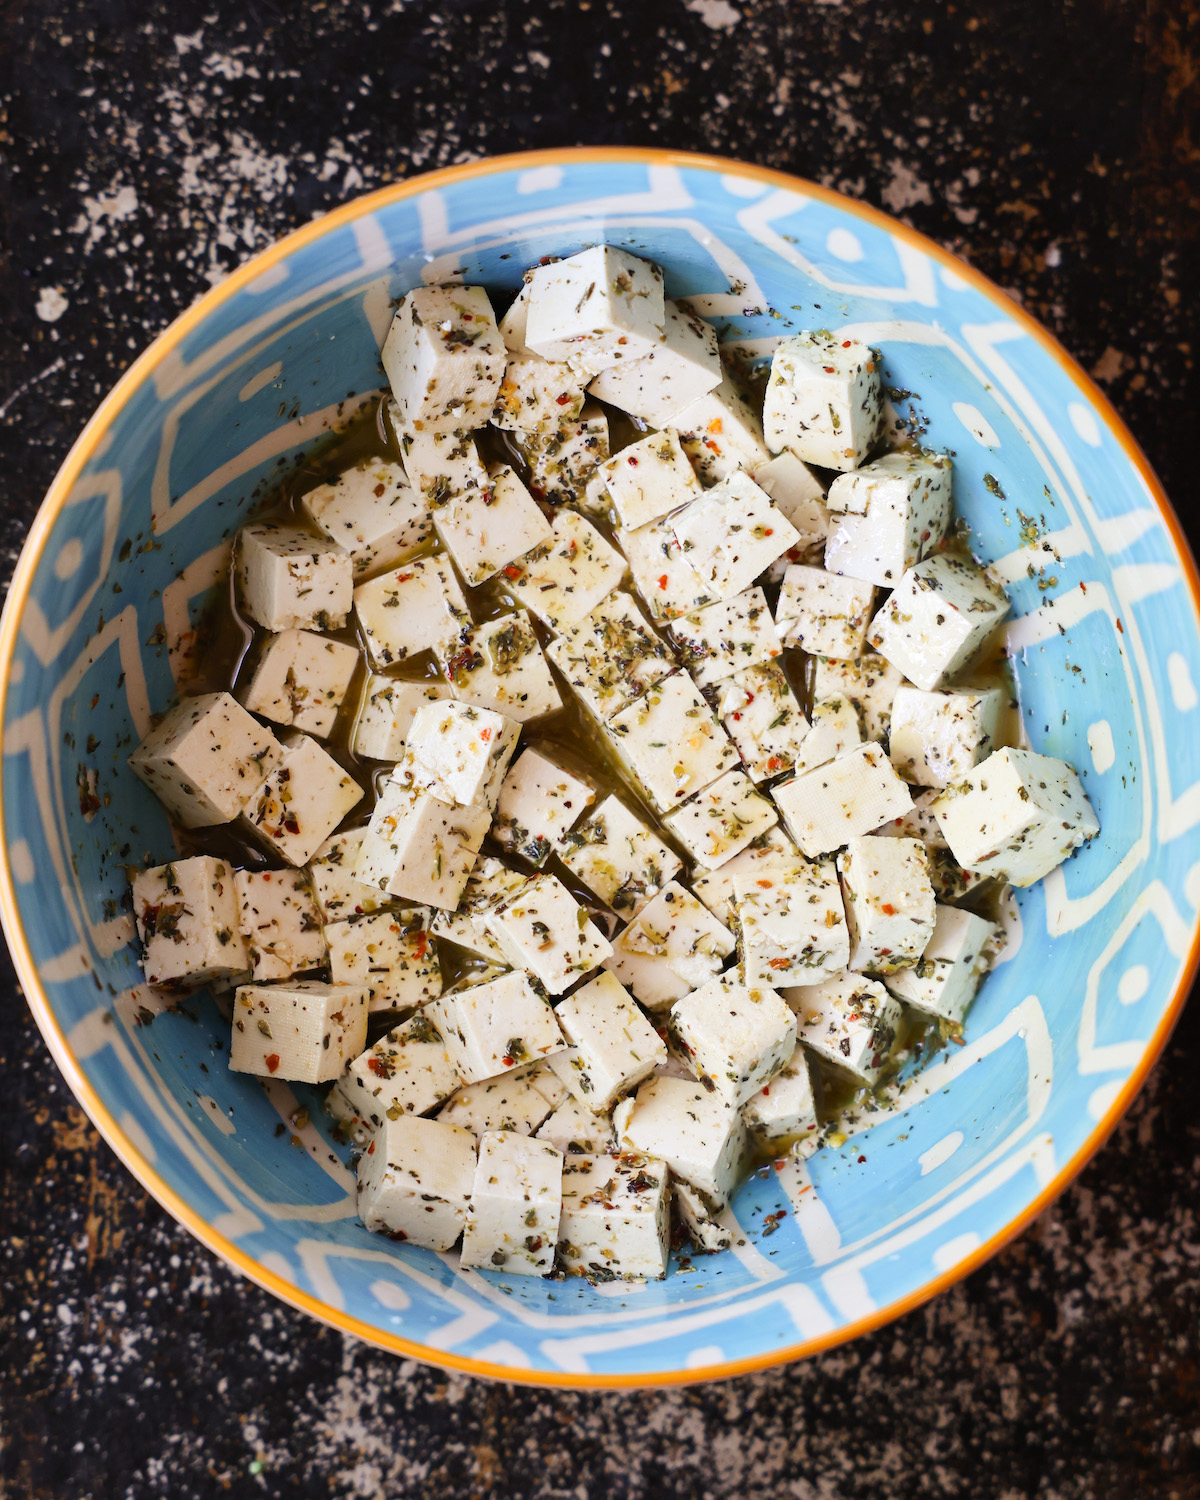 An overhead shot of a blue patterned bowl of marinating tofu cubes.